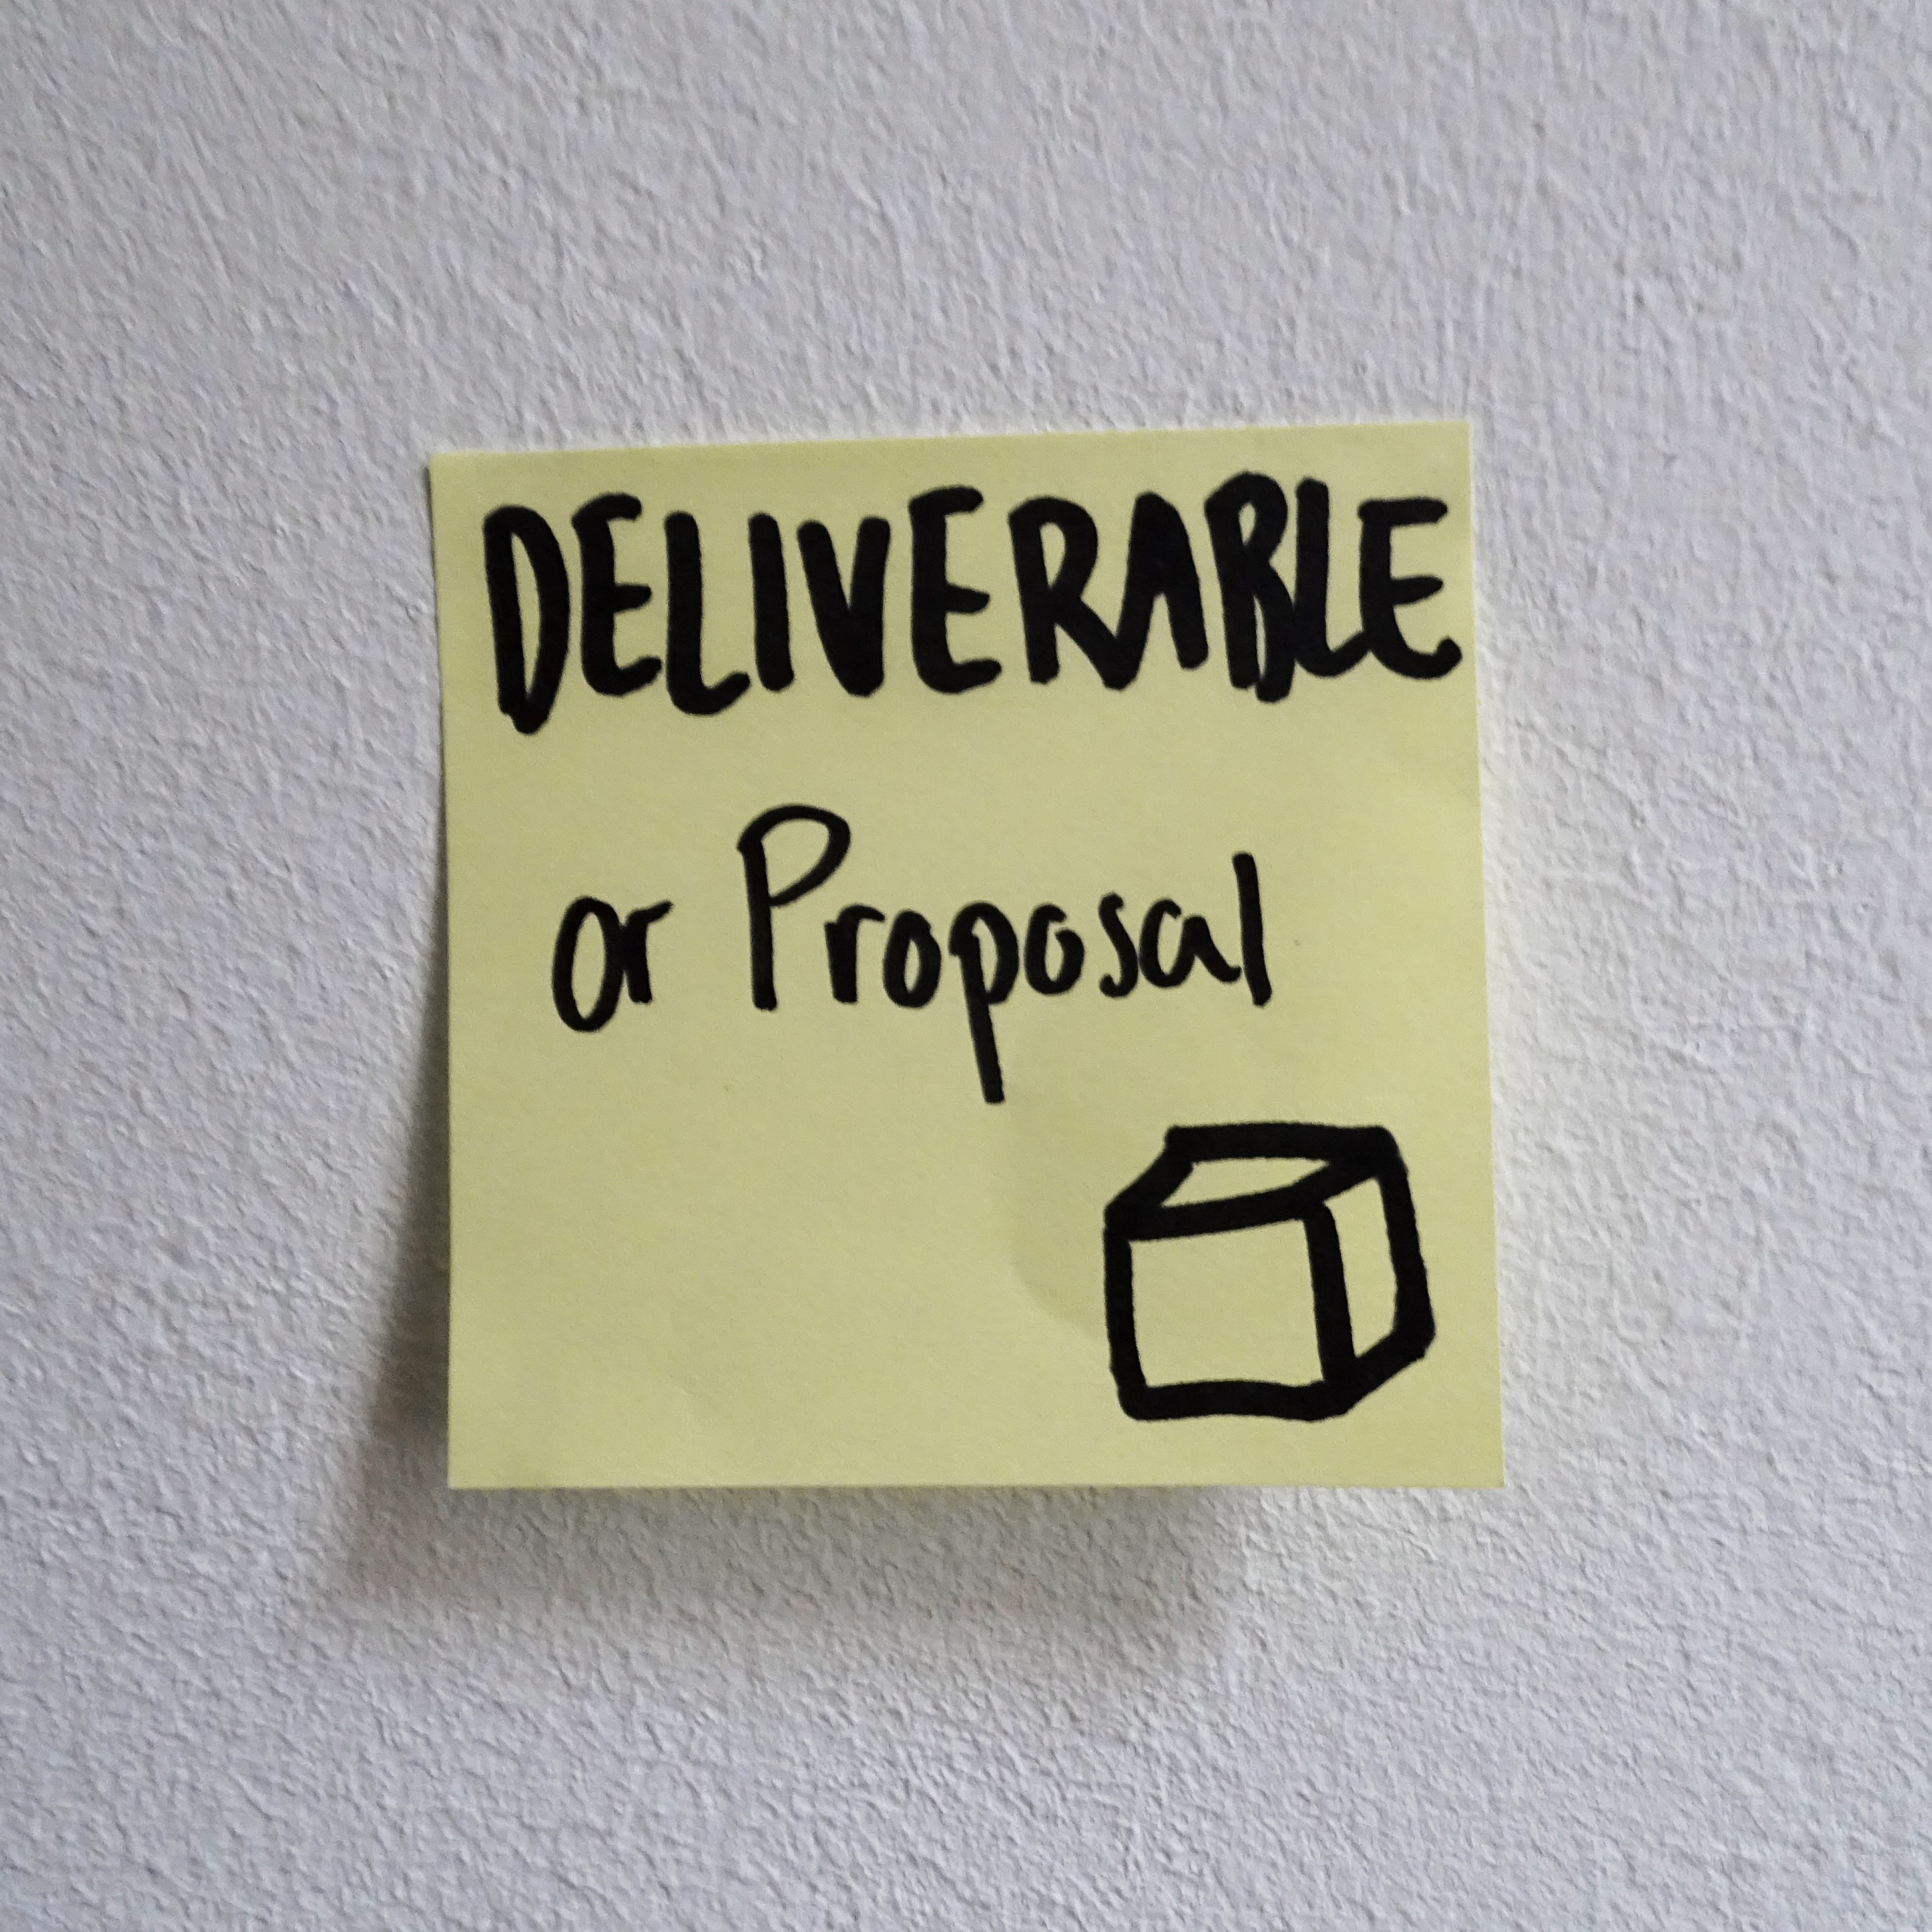 Deliverable (or Proposal)